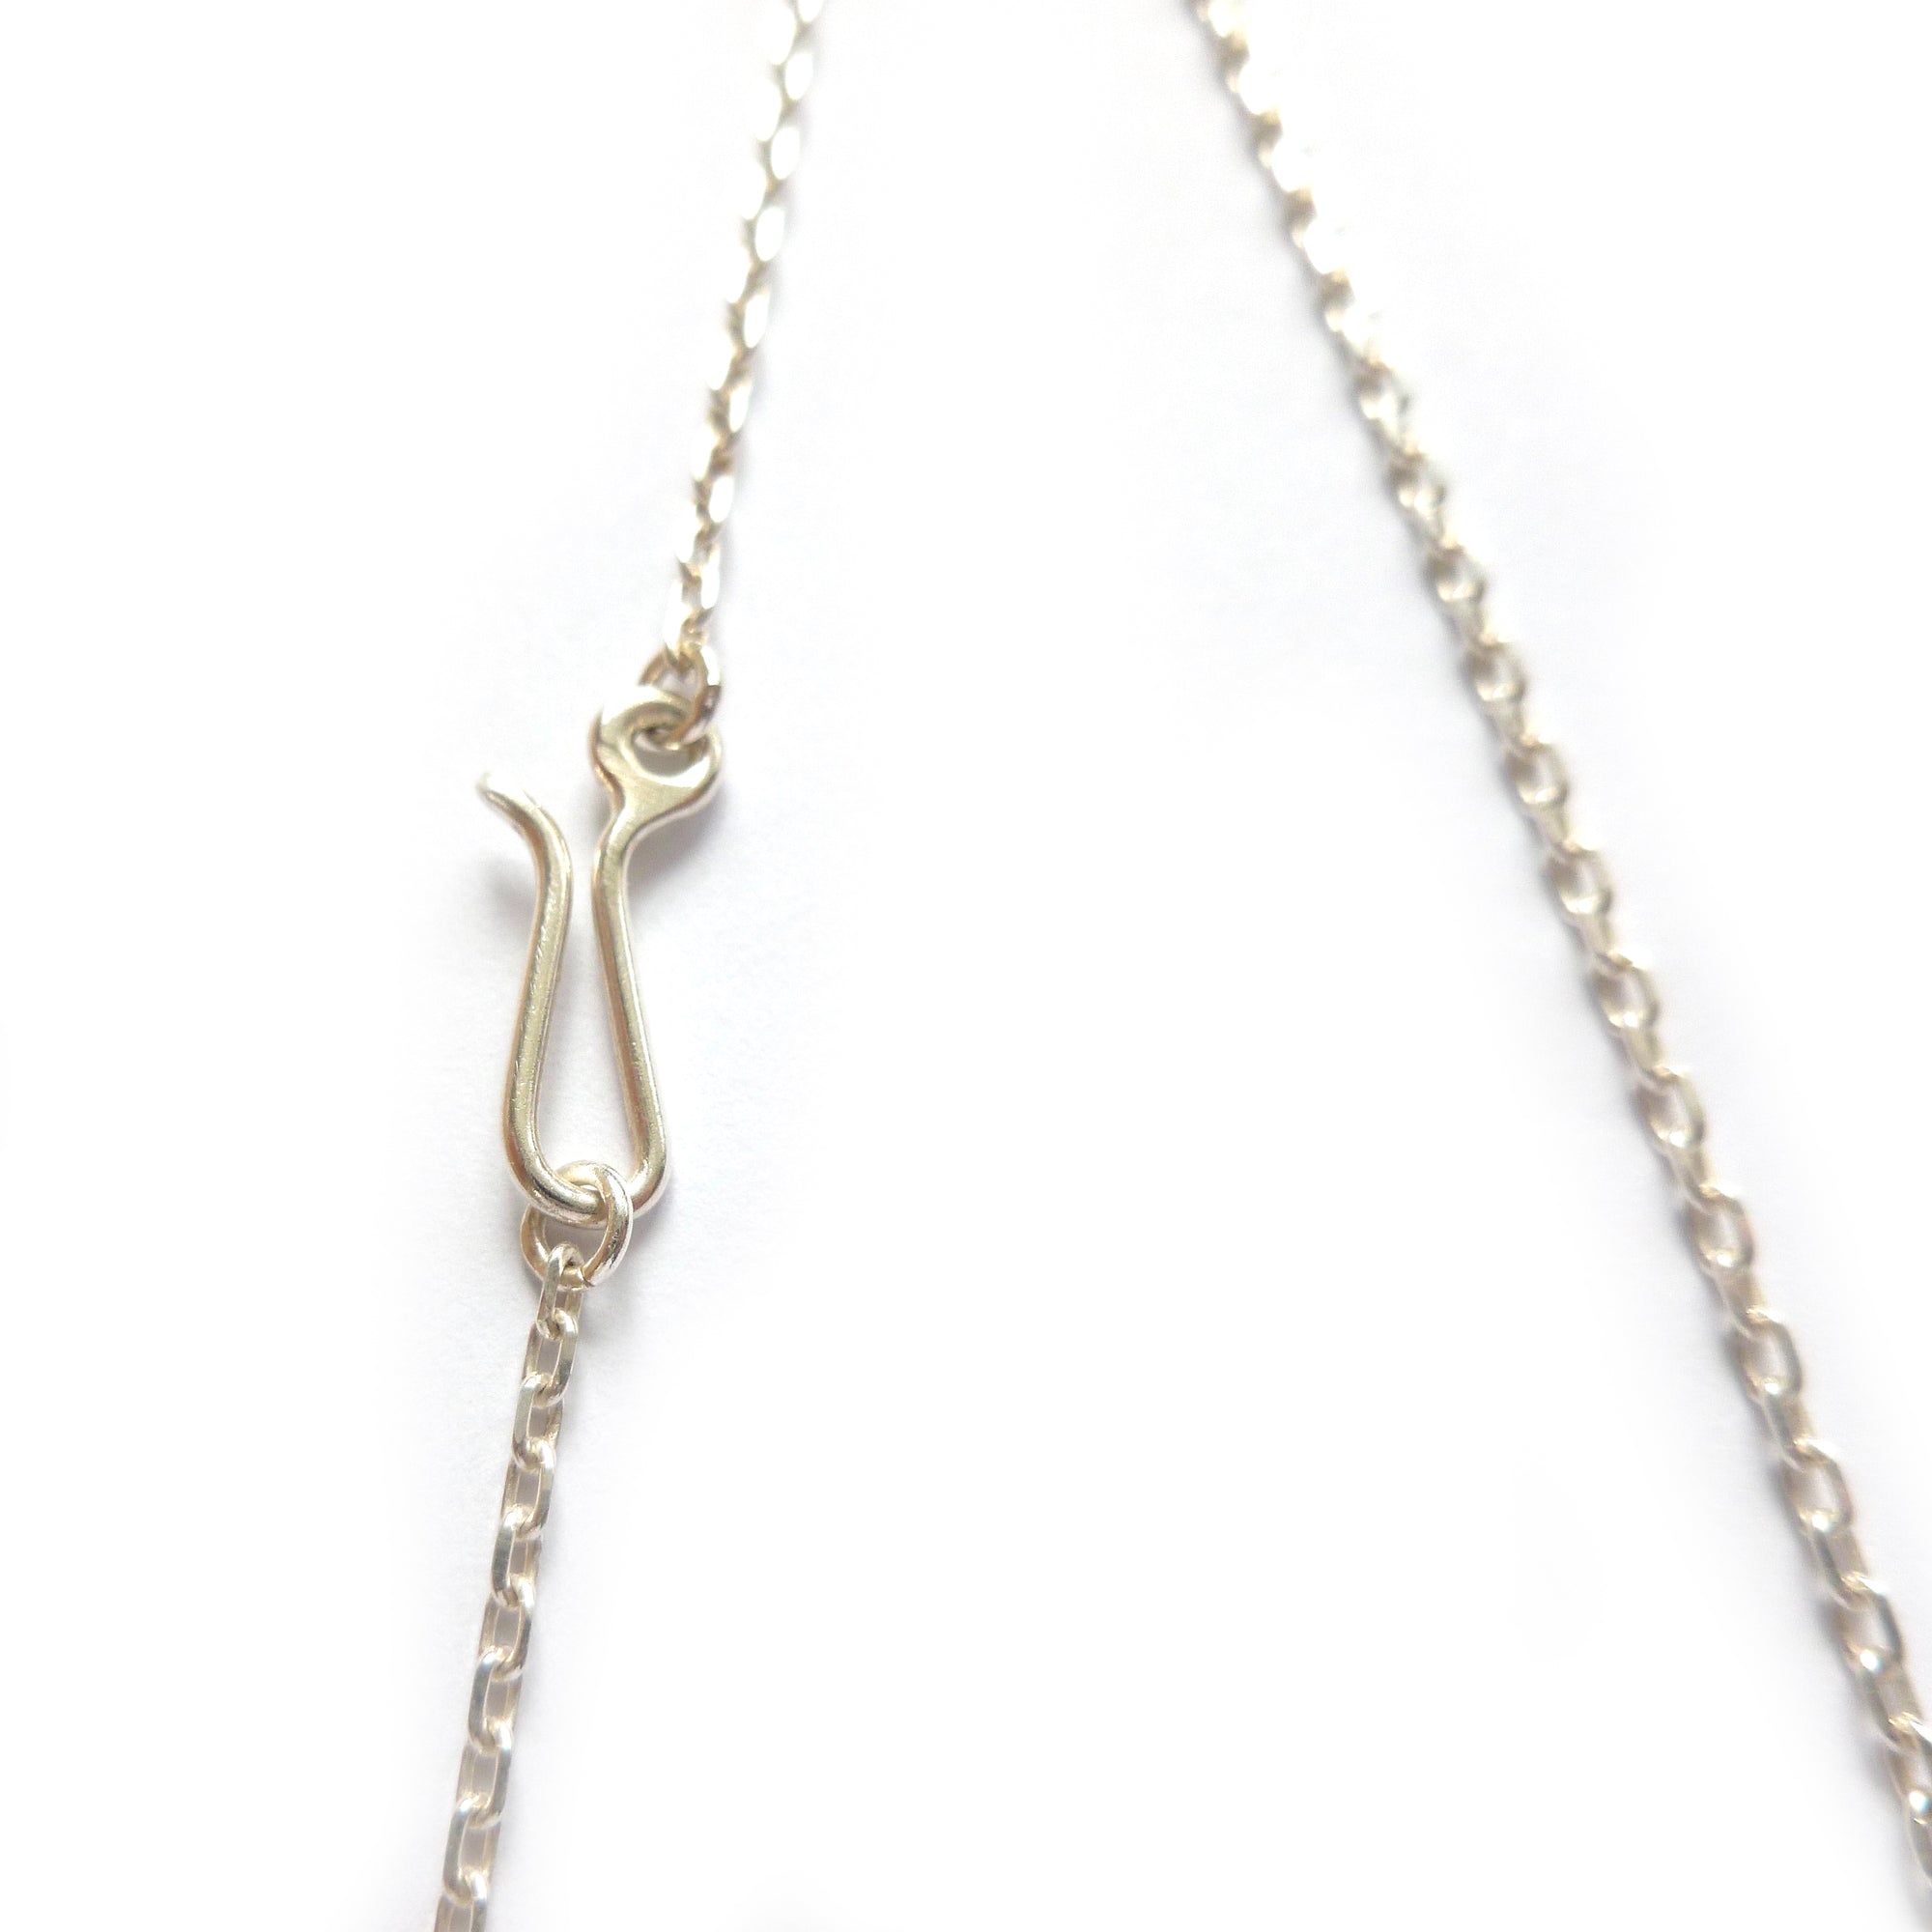 contemporary silver and diamond necklace by Sue Lane 